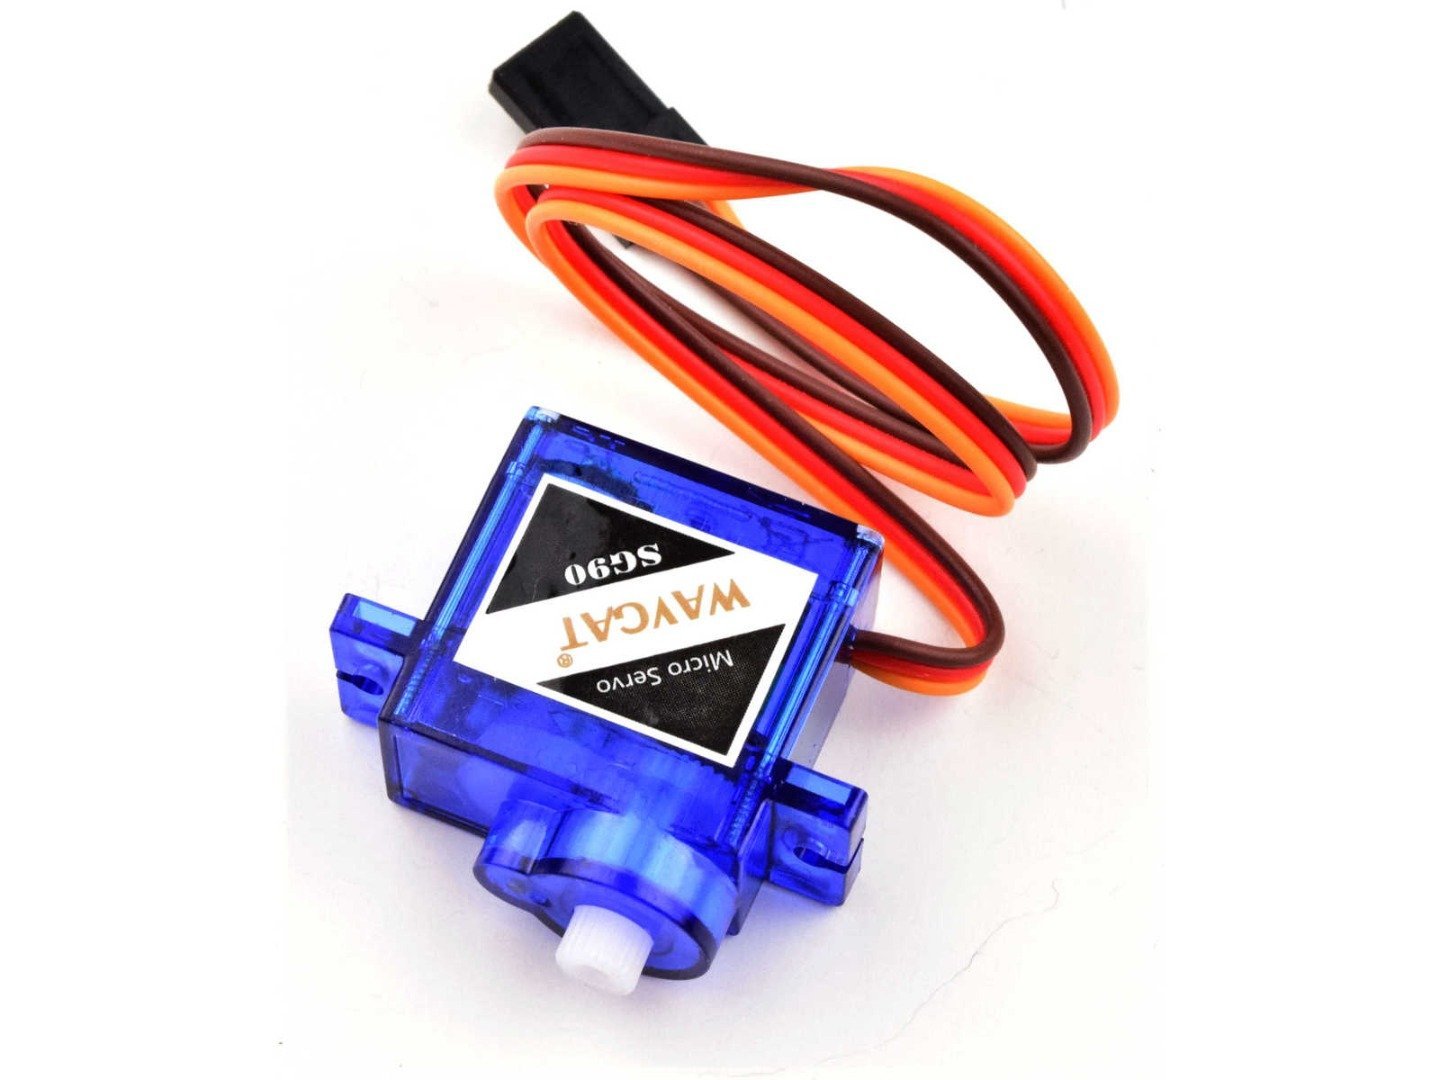 Micro RC Servo SG90 4.8-6V for helicopters cars planes 6